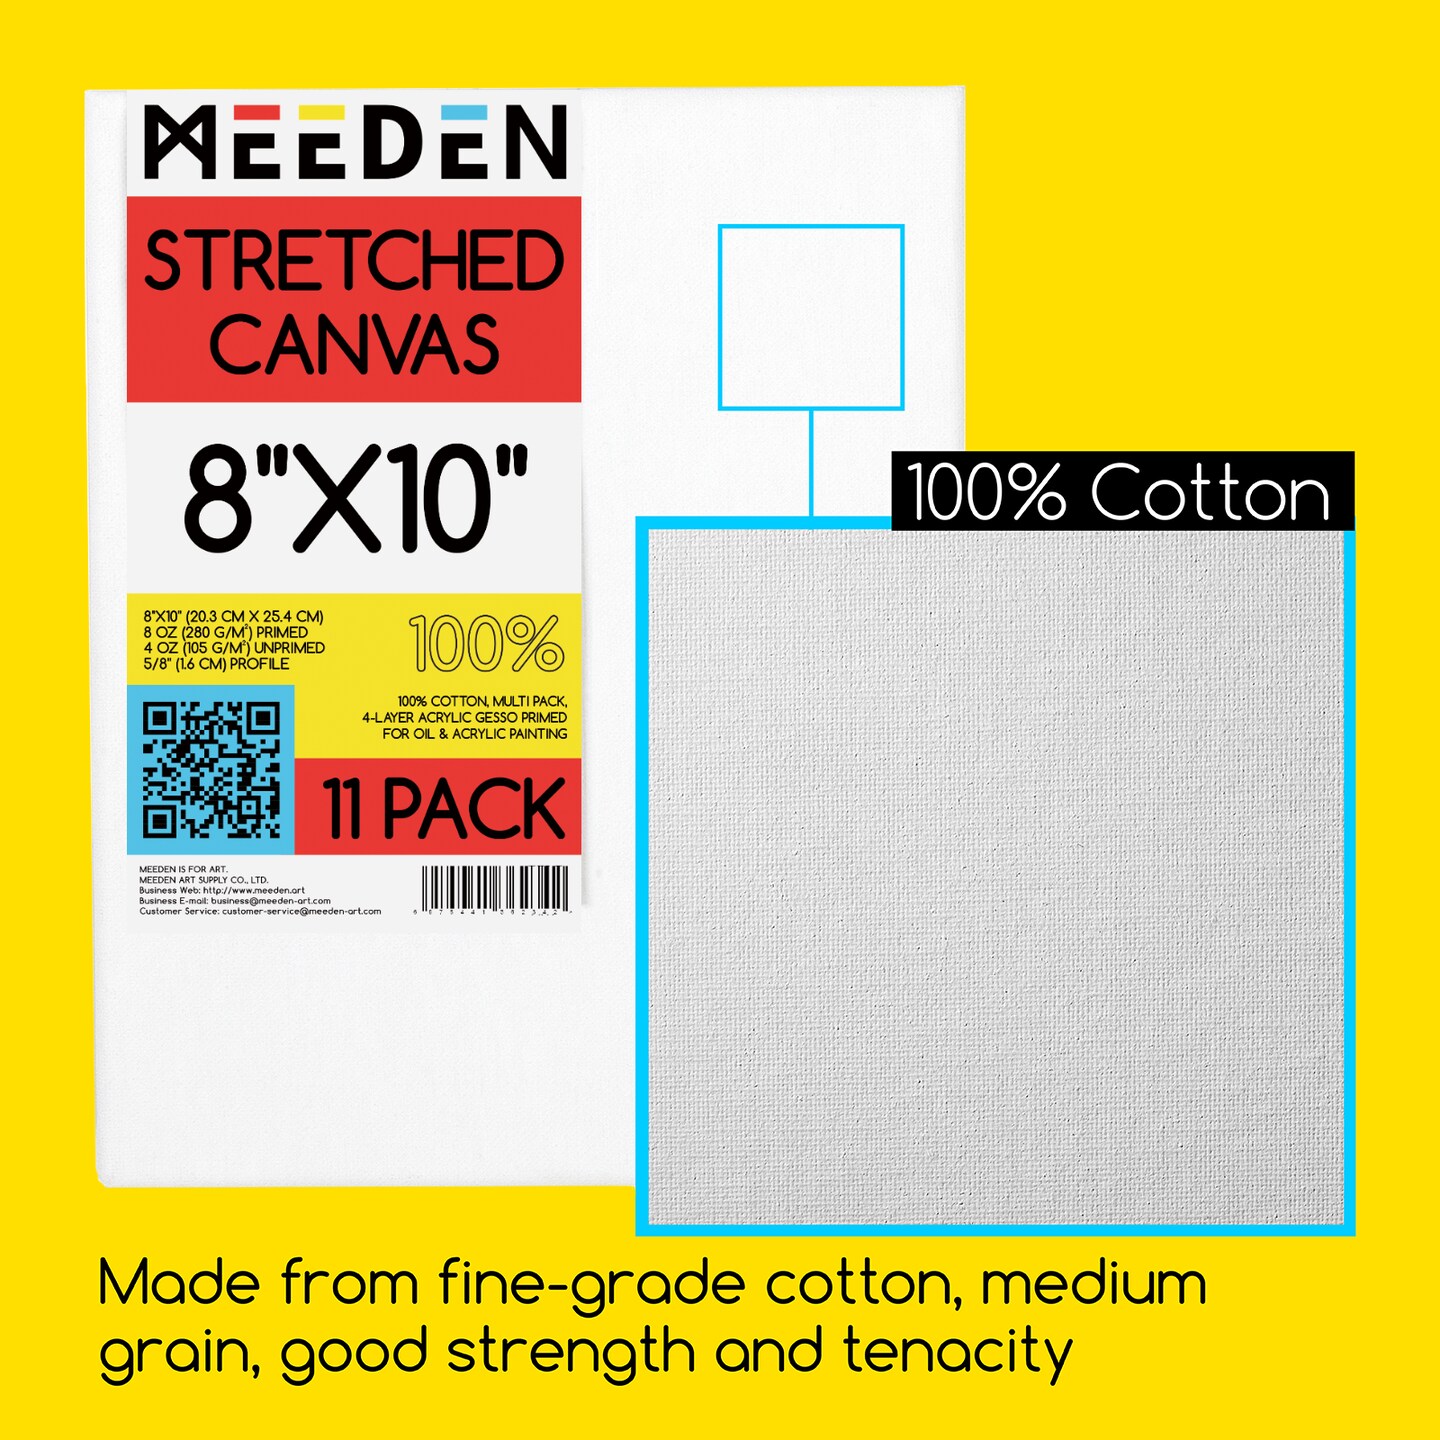 MEEDEN Stretched Canvas, 8 &#xD7; 10 Inch, Pack of 11, Blank White Canvases for Painting, 100% Cotton, 8 oz Gesso-Primed, Pre-Stretched Canvas for Acrylic Oil Pouring &#x26; Airbrushing Painting